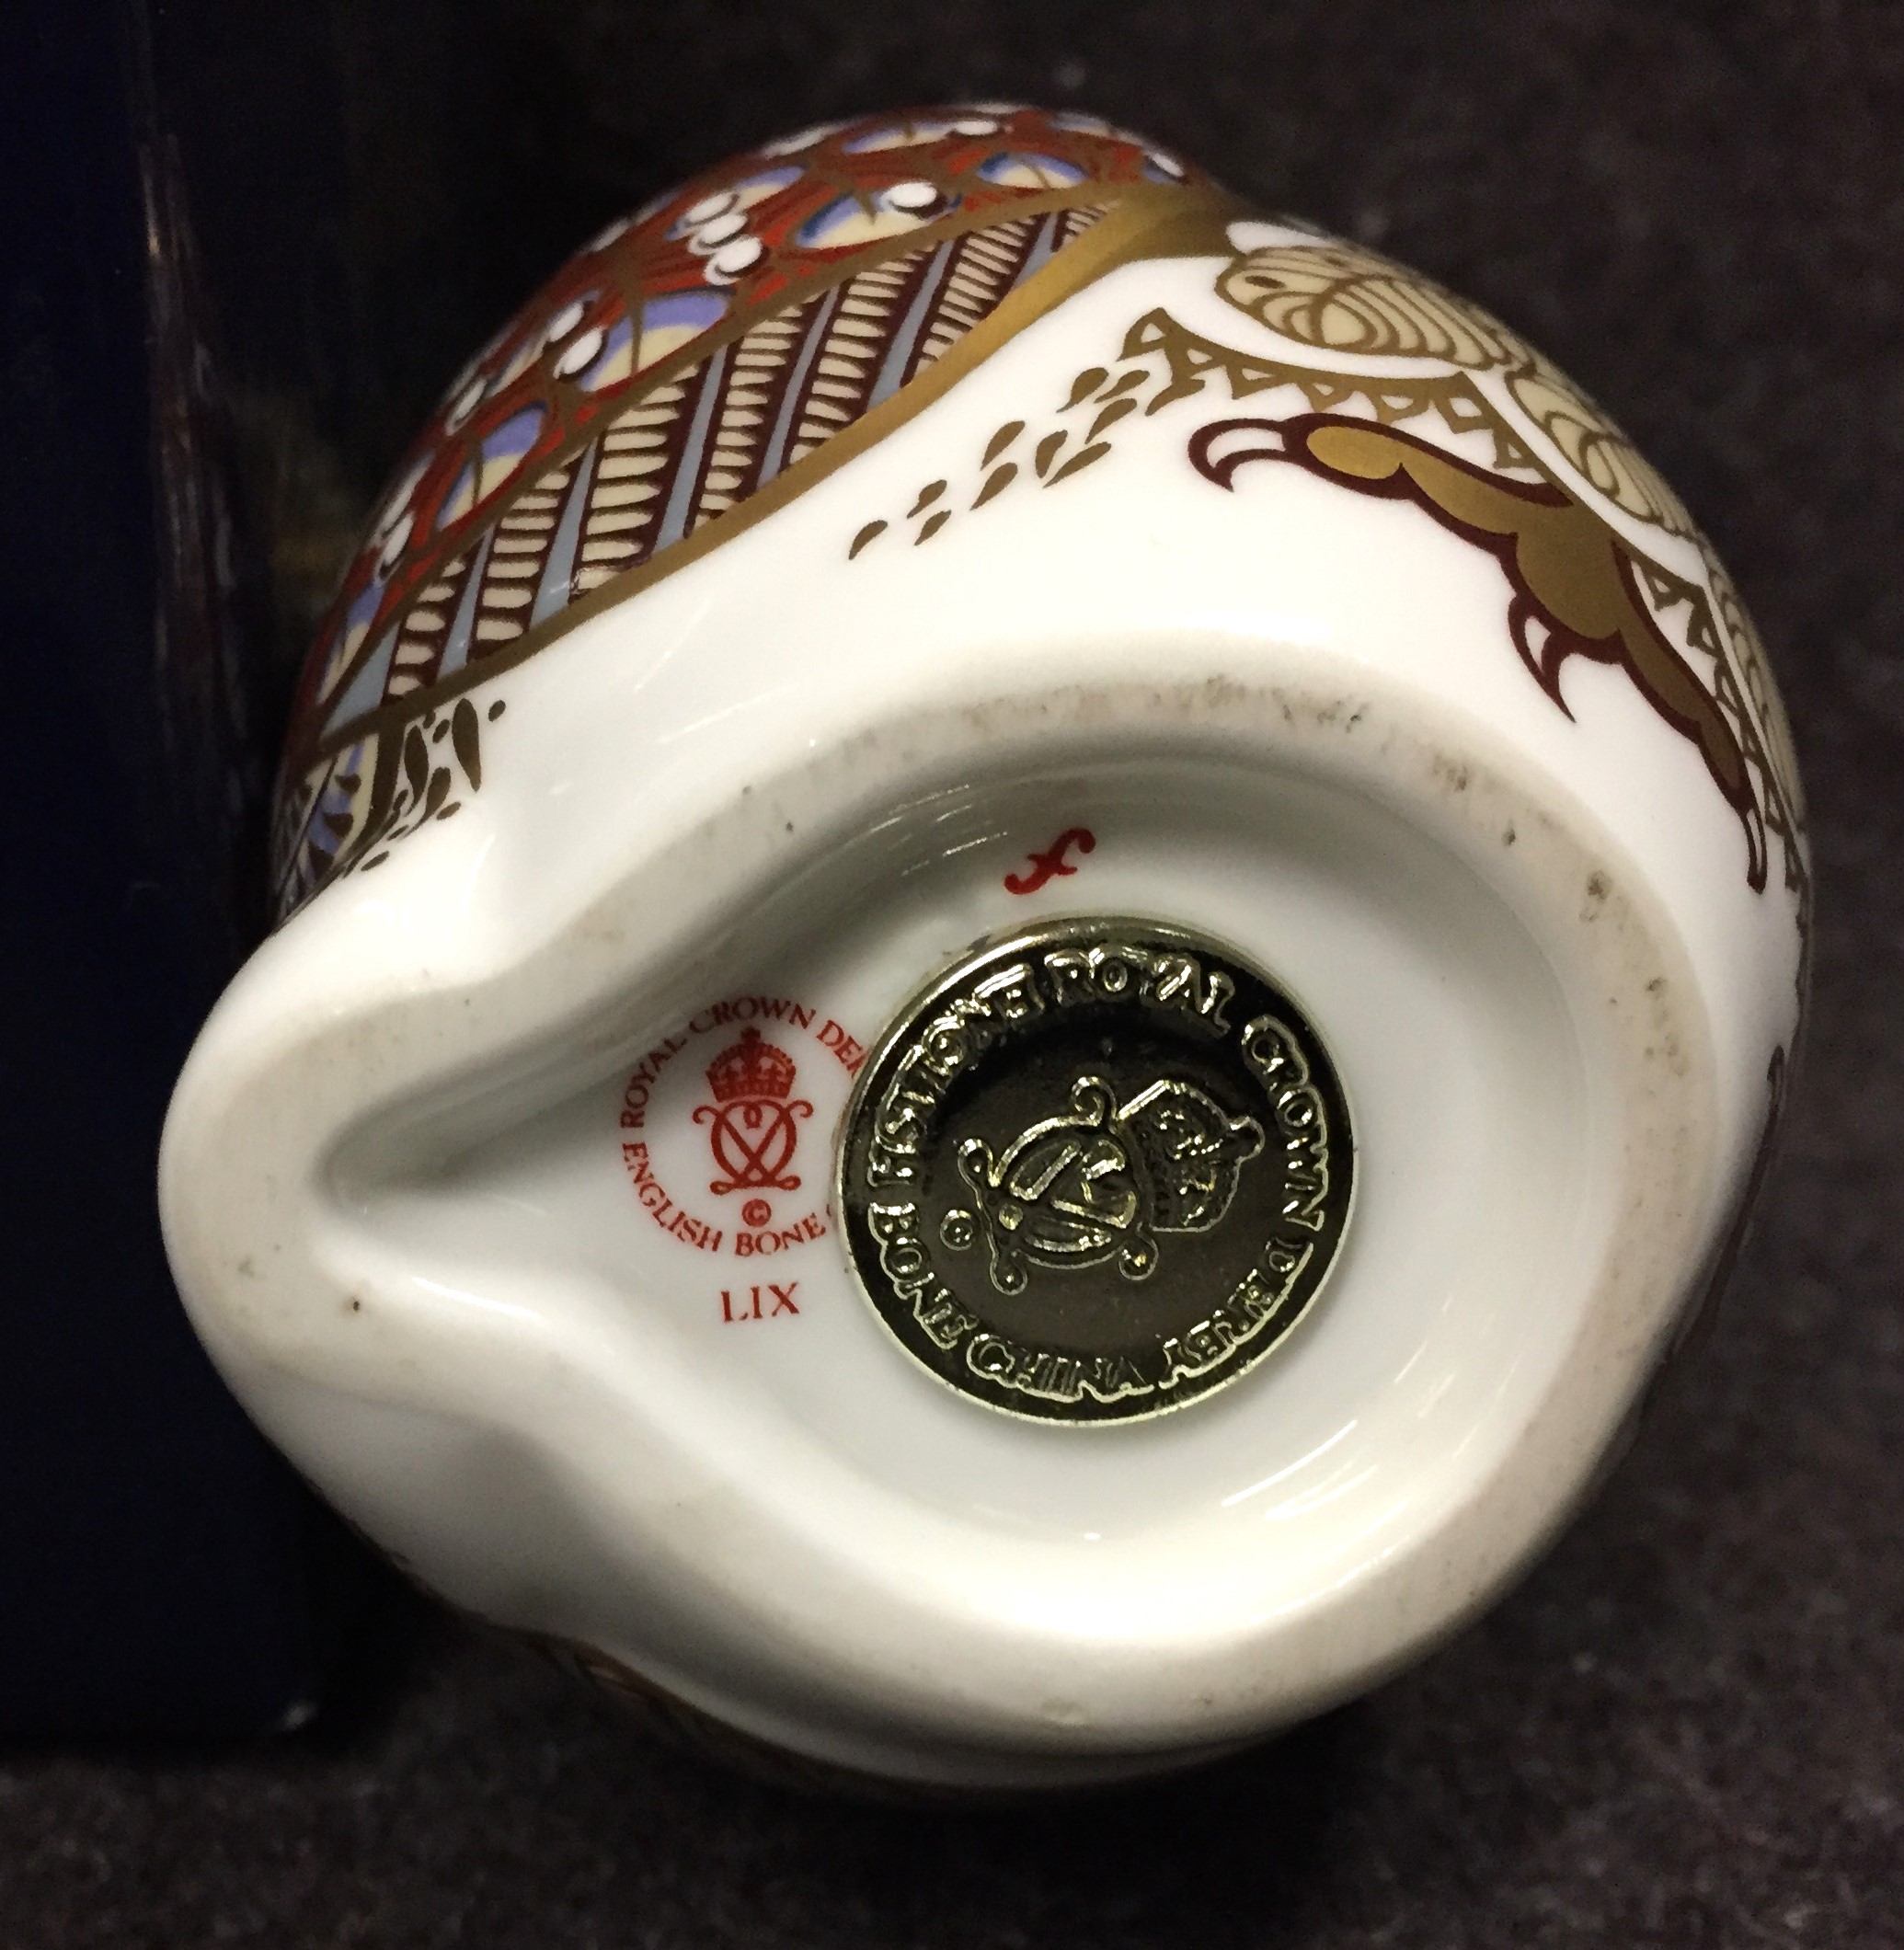 Royal Crown Derby Barn Owl paperweight 11cm high with box (saleroom location Y05 2) - Image 3 of 3